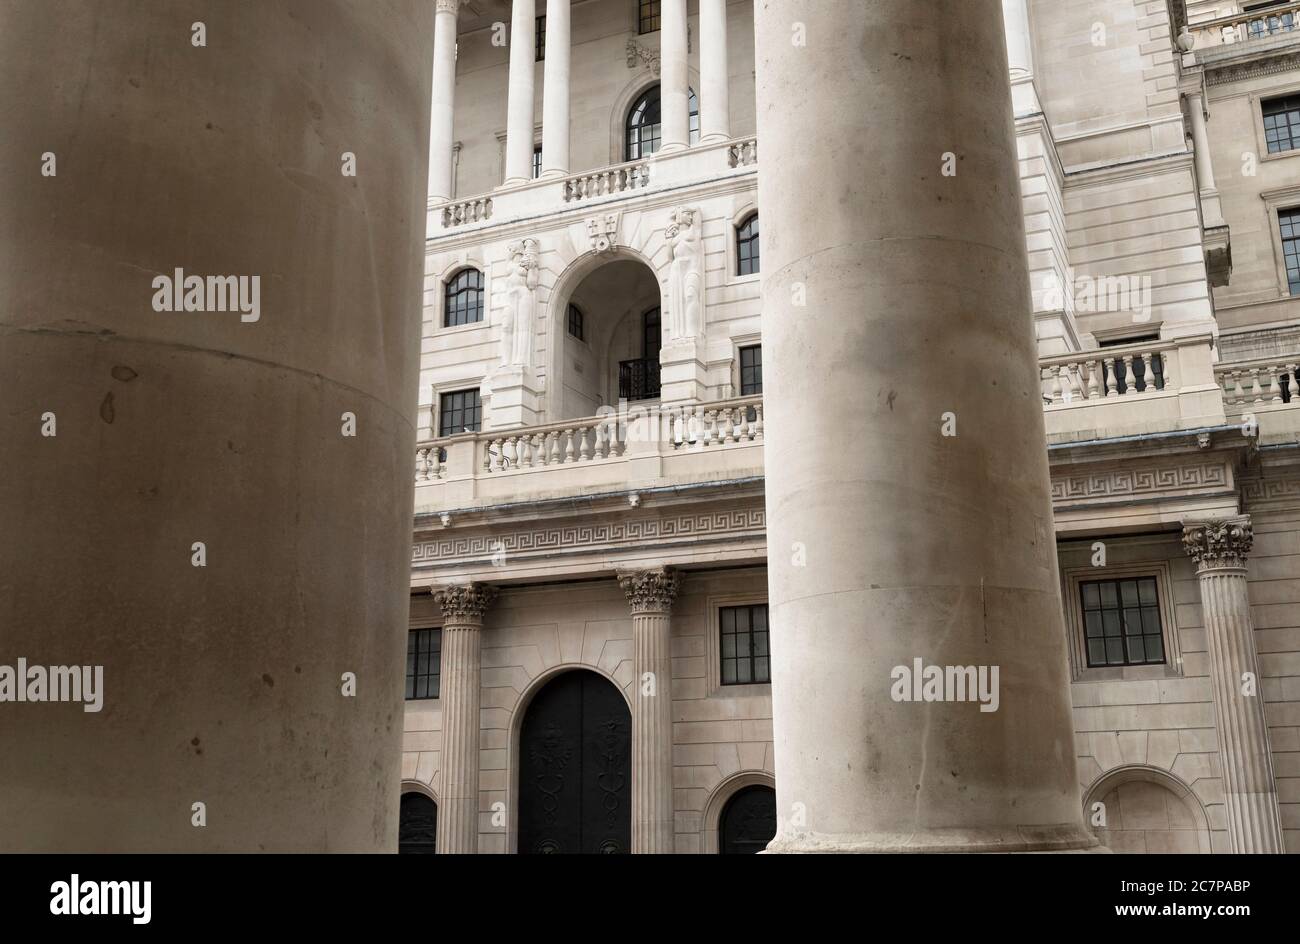 Bank of England is the central bank of the United Kingdom. Sometimes known as the ‘Old Lady’ of Threadneedle Street'. Threadneedle Street, London, UK  18 Mar 2017 Stock Photo